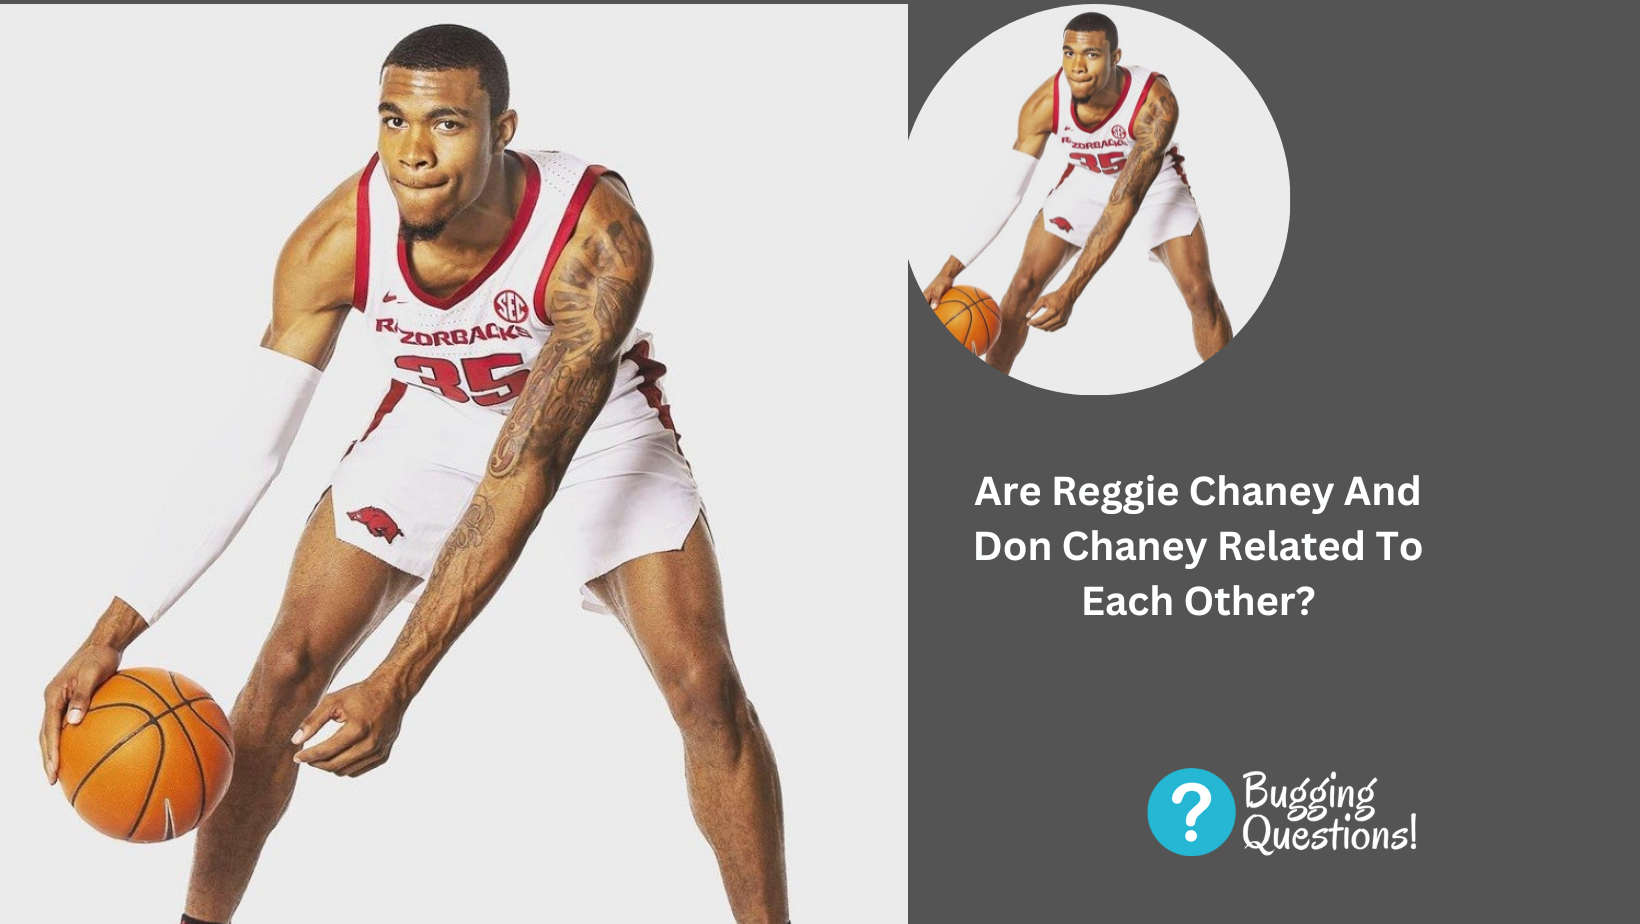 Are Reggie Chaney And Don Chaney Related To Each Other?